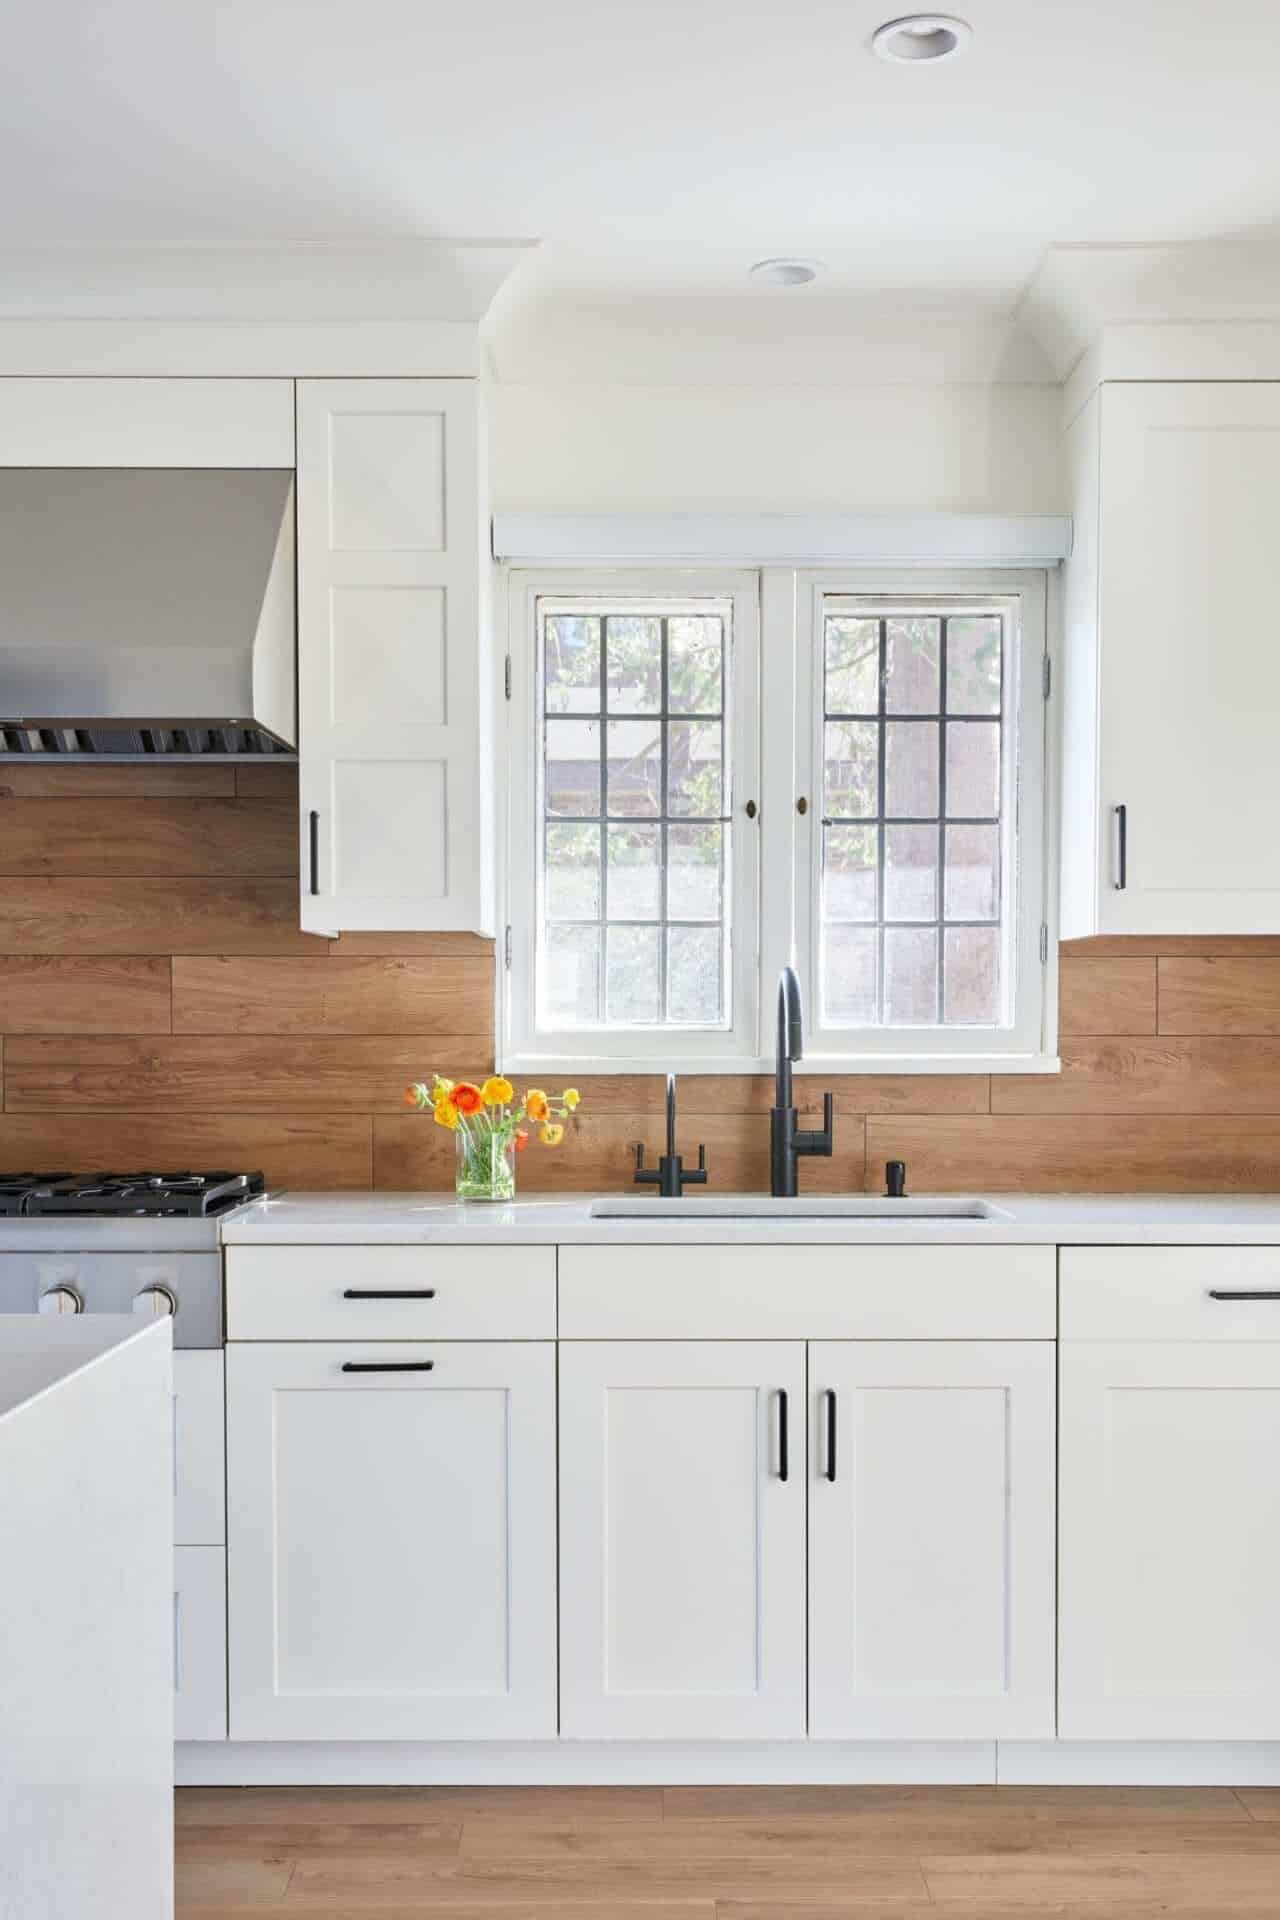 All white classic kitchen with wood backsplash and black faucet